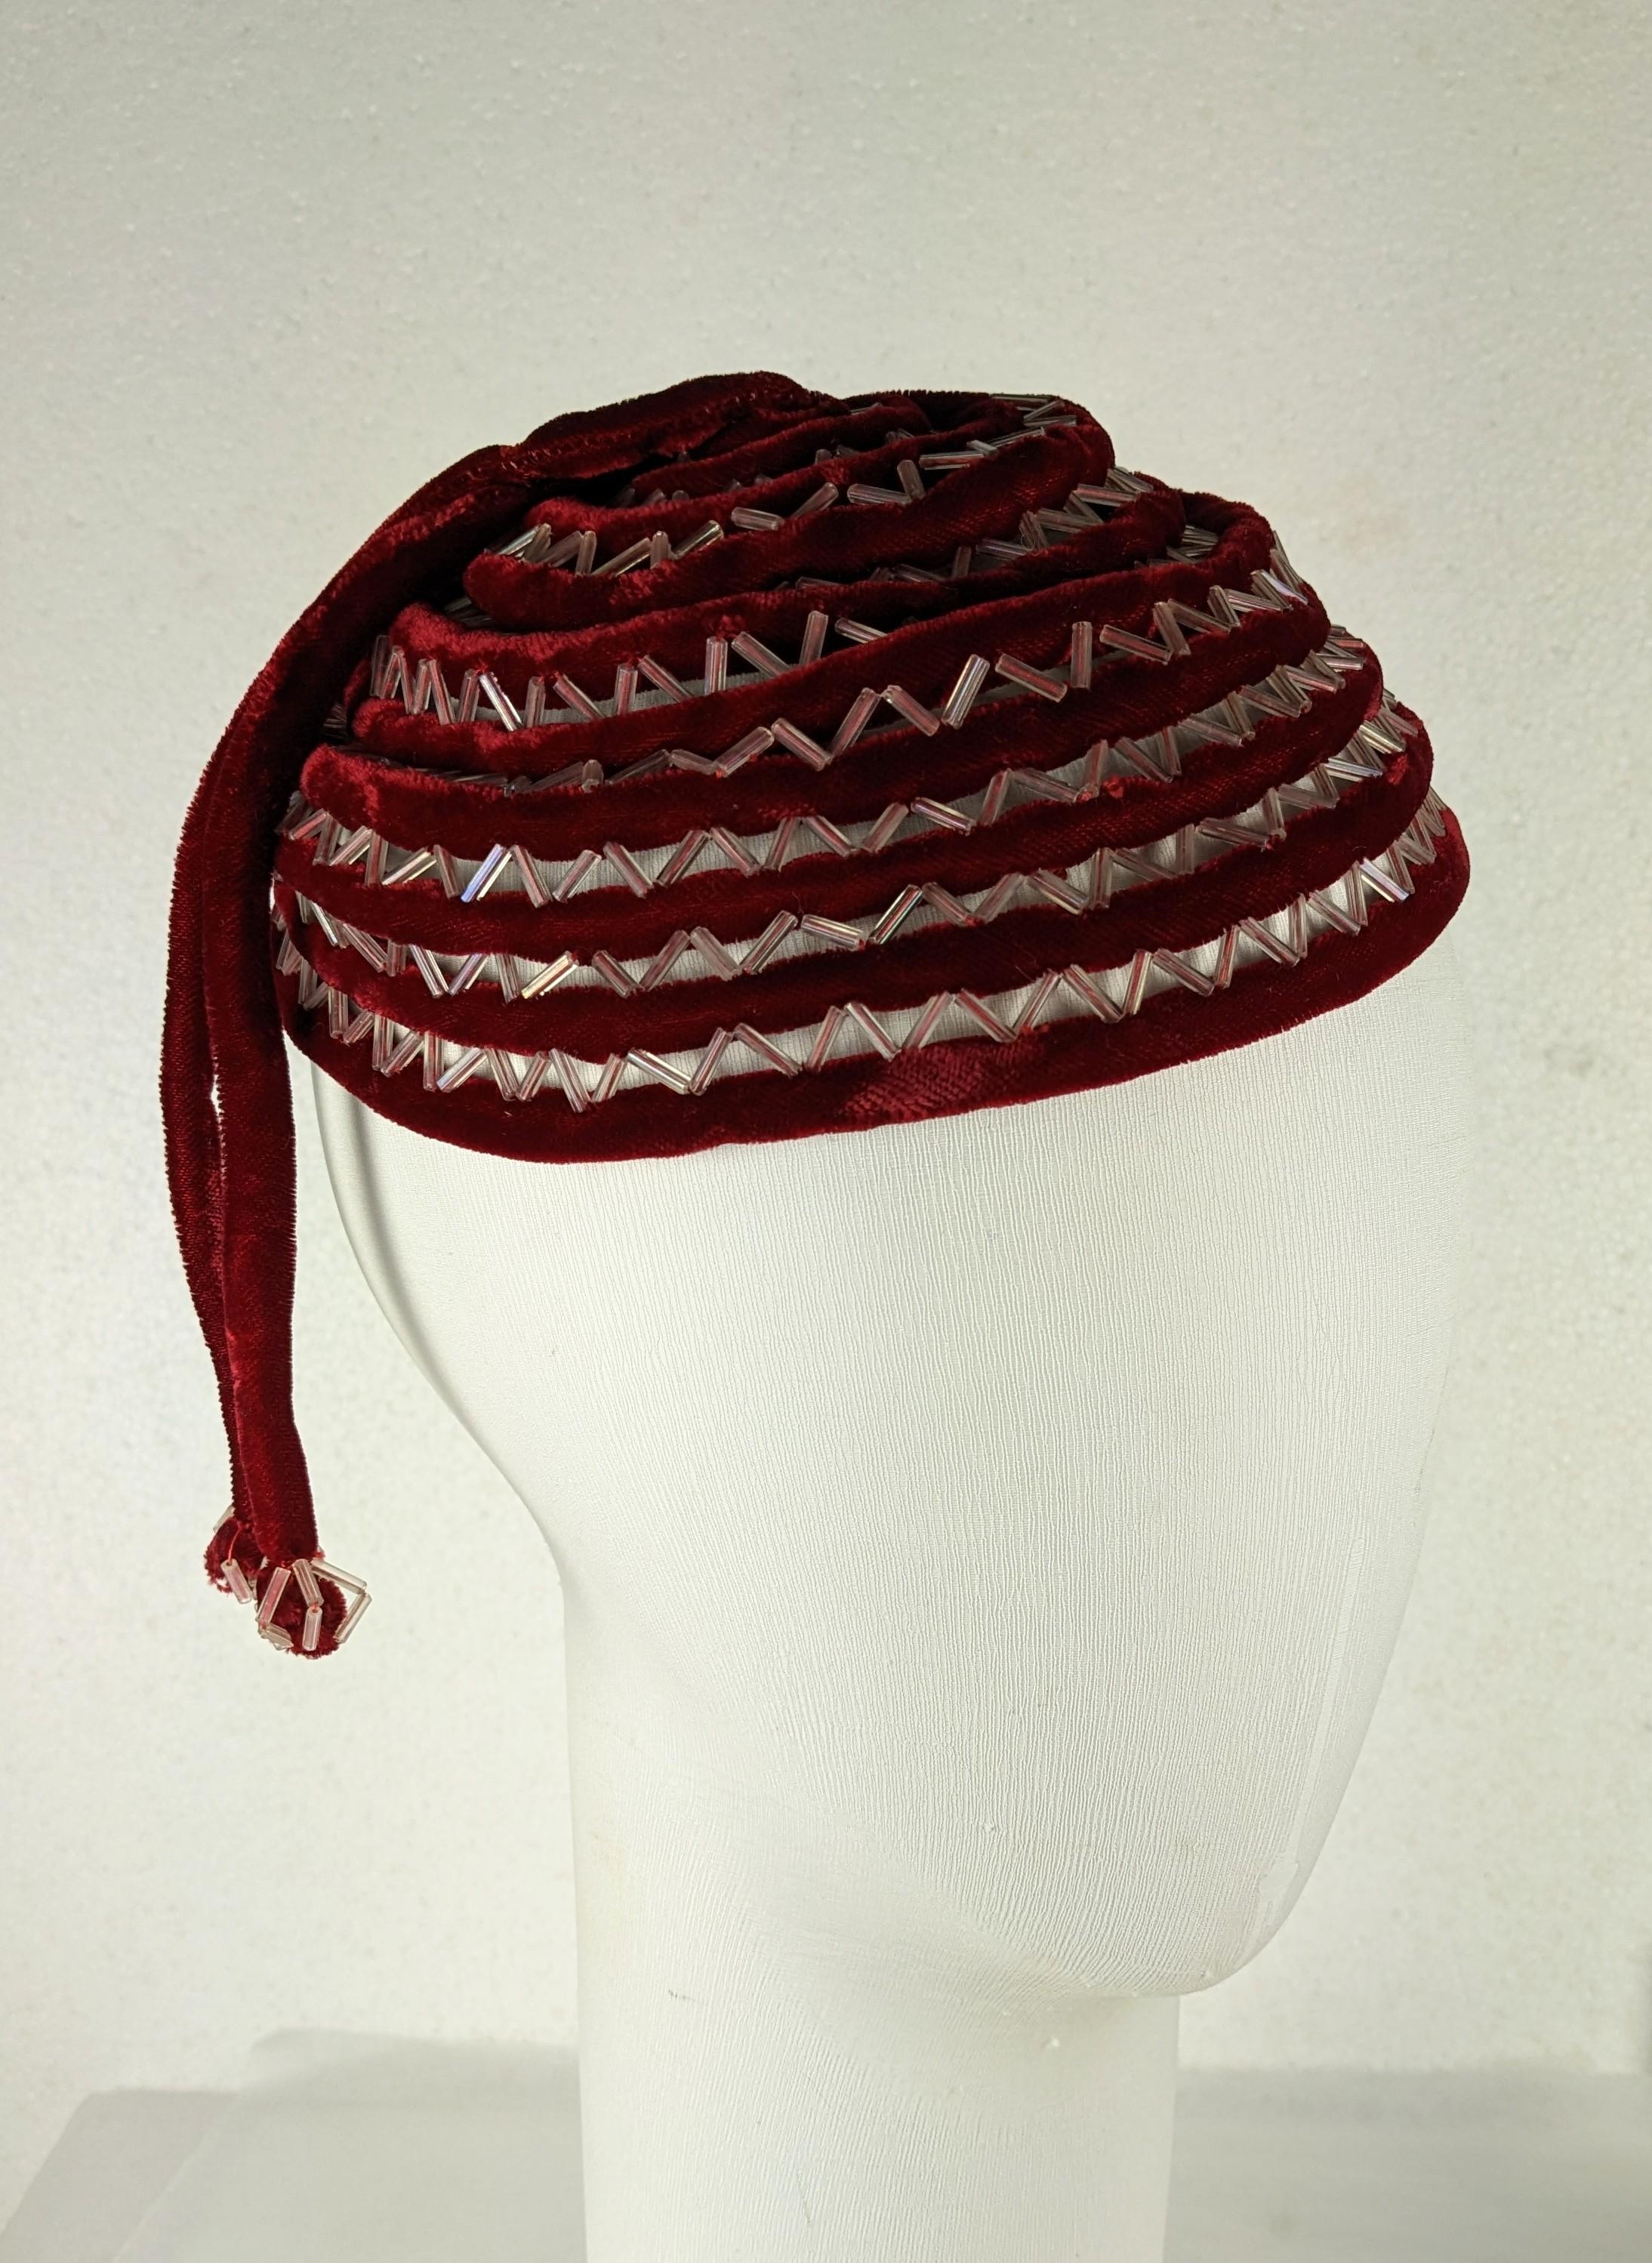 Charming Art Deco Velvet Spiral Beaded Cap from the 1920's. Burgundy bias velvet tubing is used to form a spiral with a hand stitched ladder of bugle beads connecting the 2 materials. 
Ingenious construction. 1930's USA or France. 
Height 3.5